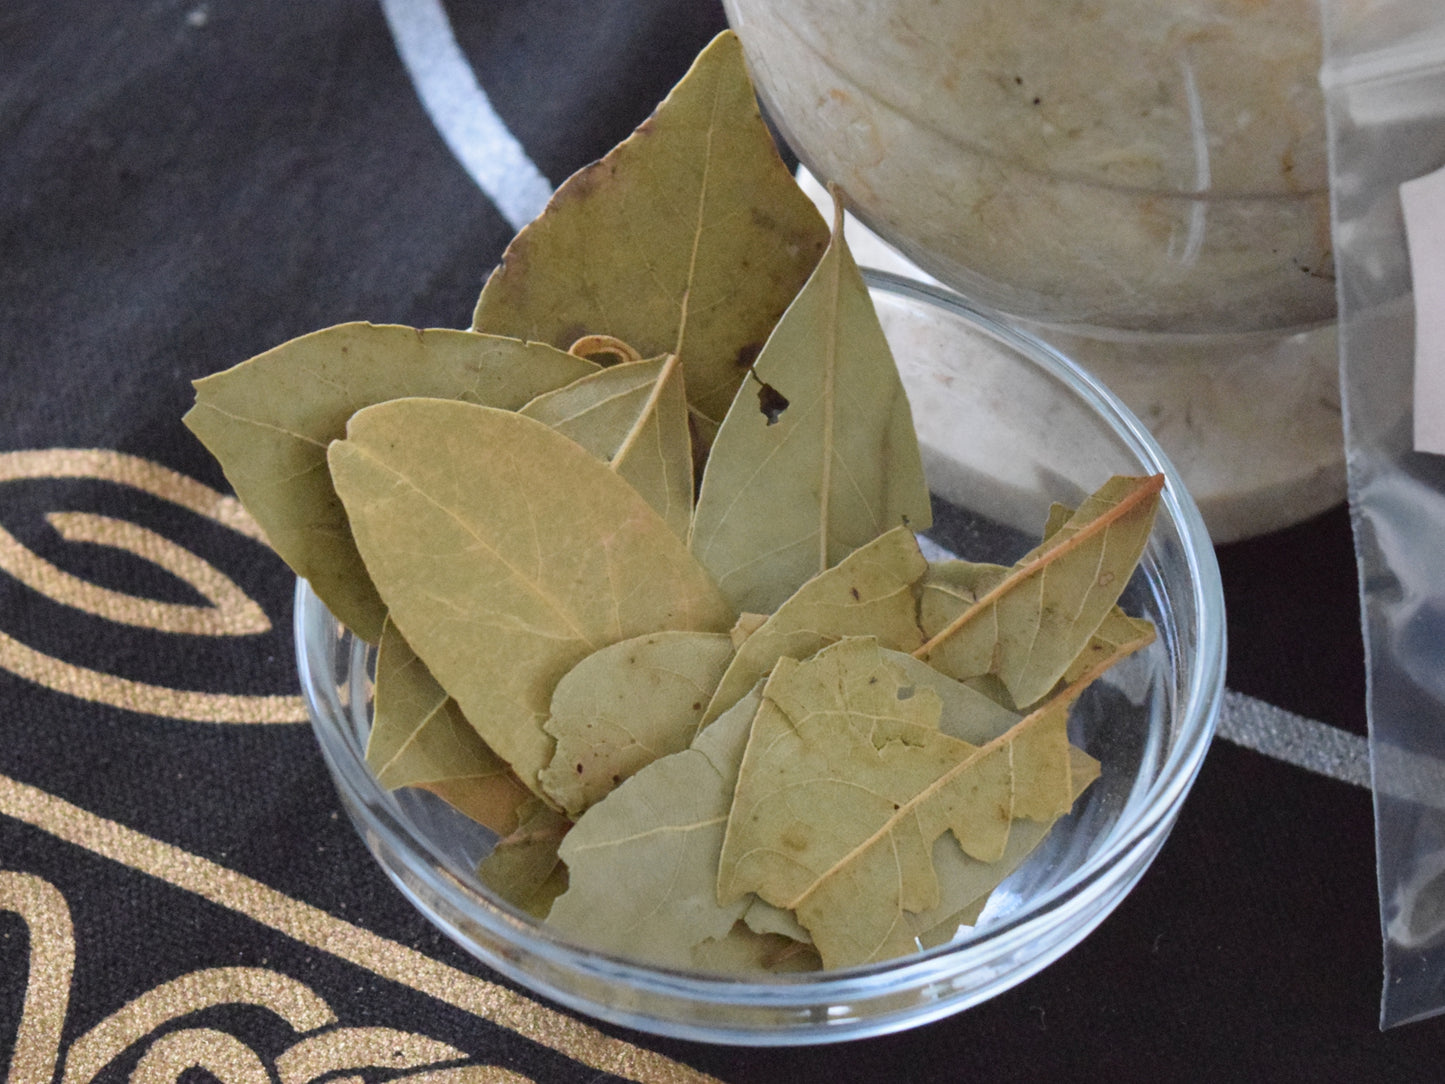 Bay Leaves for Good Fortune